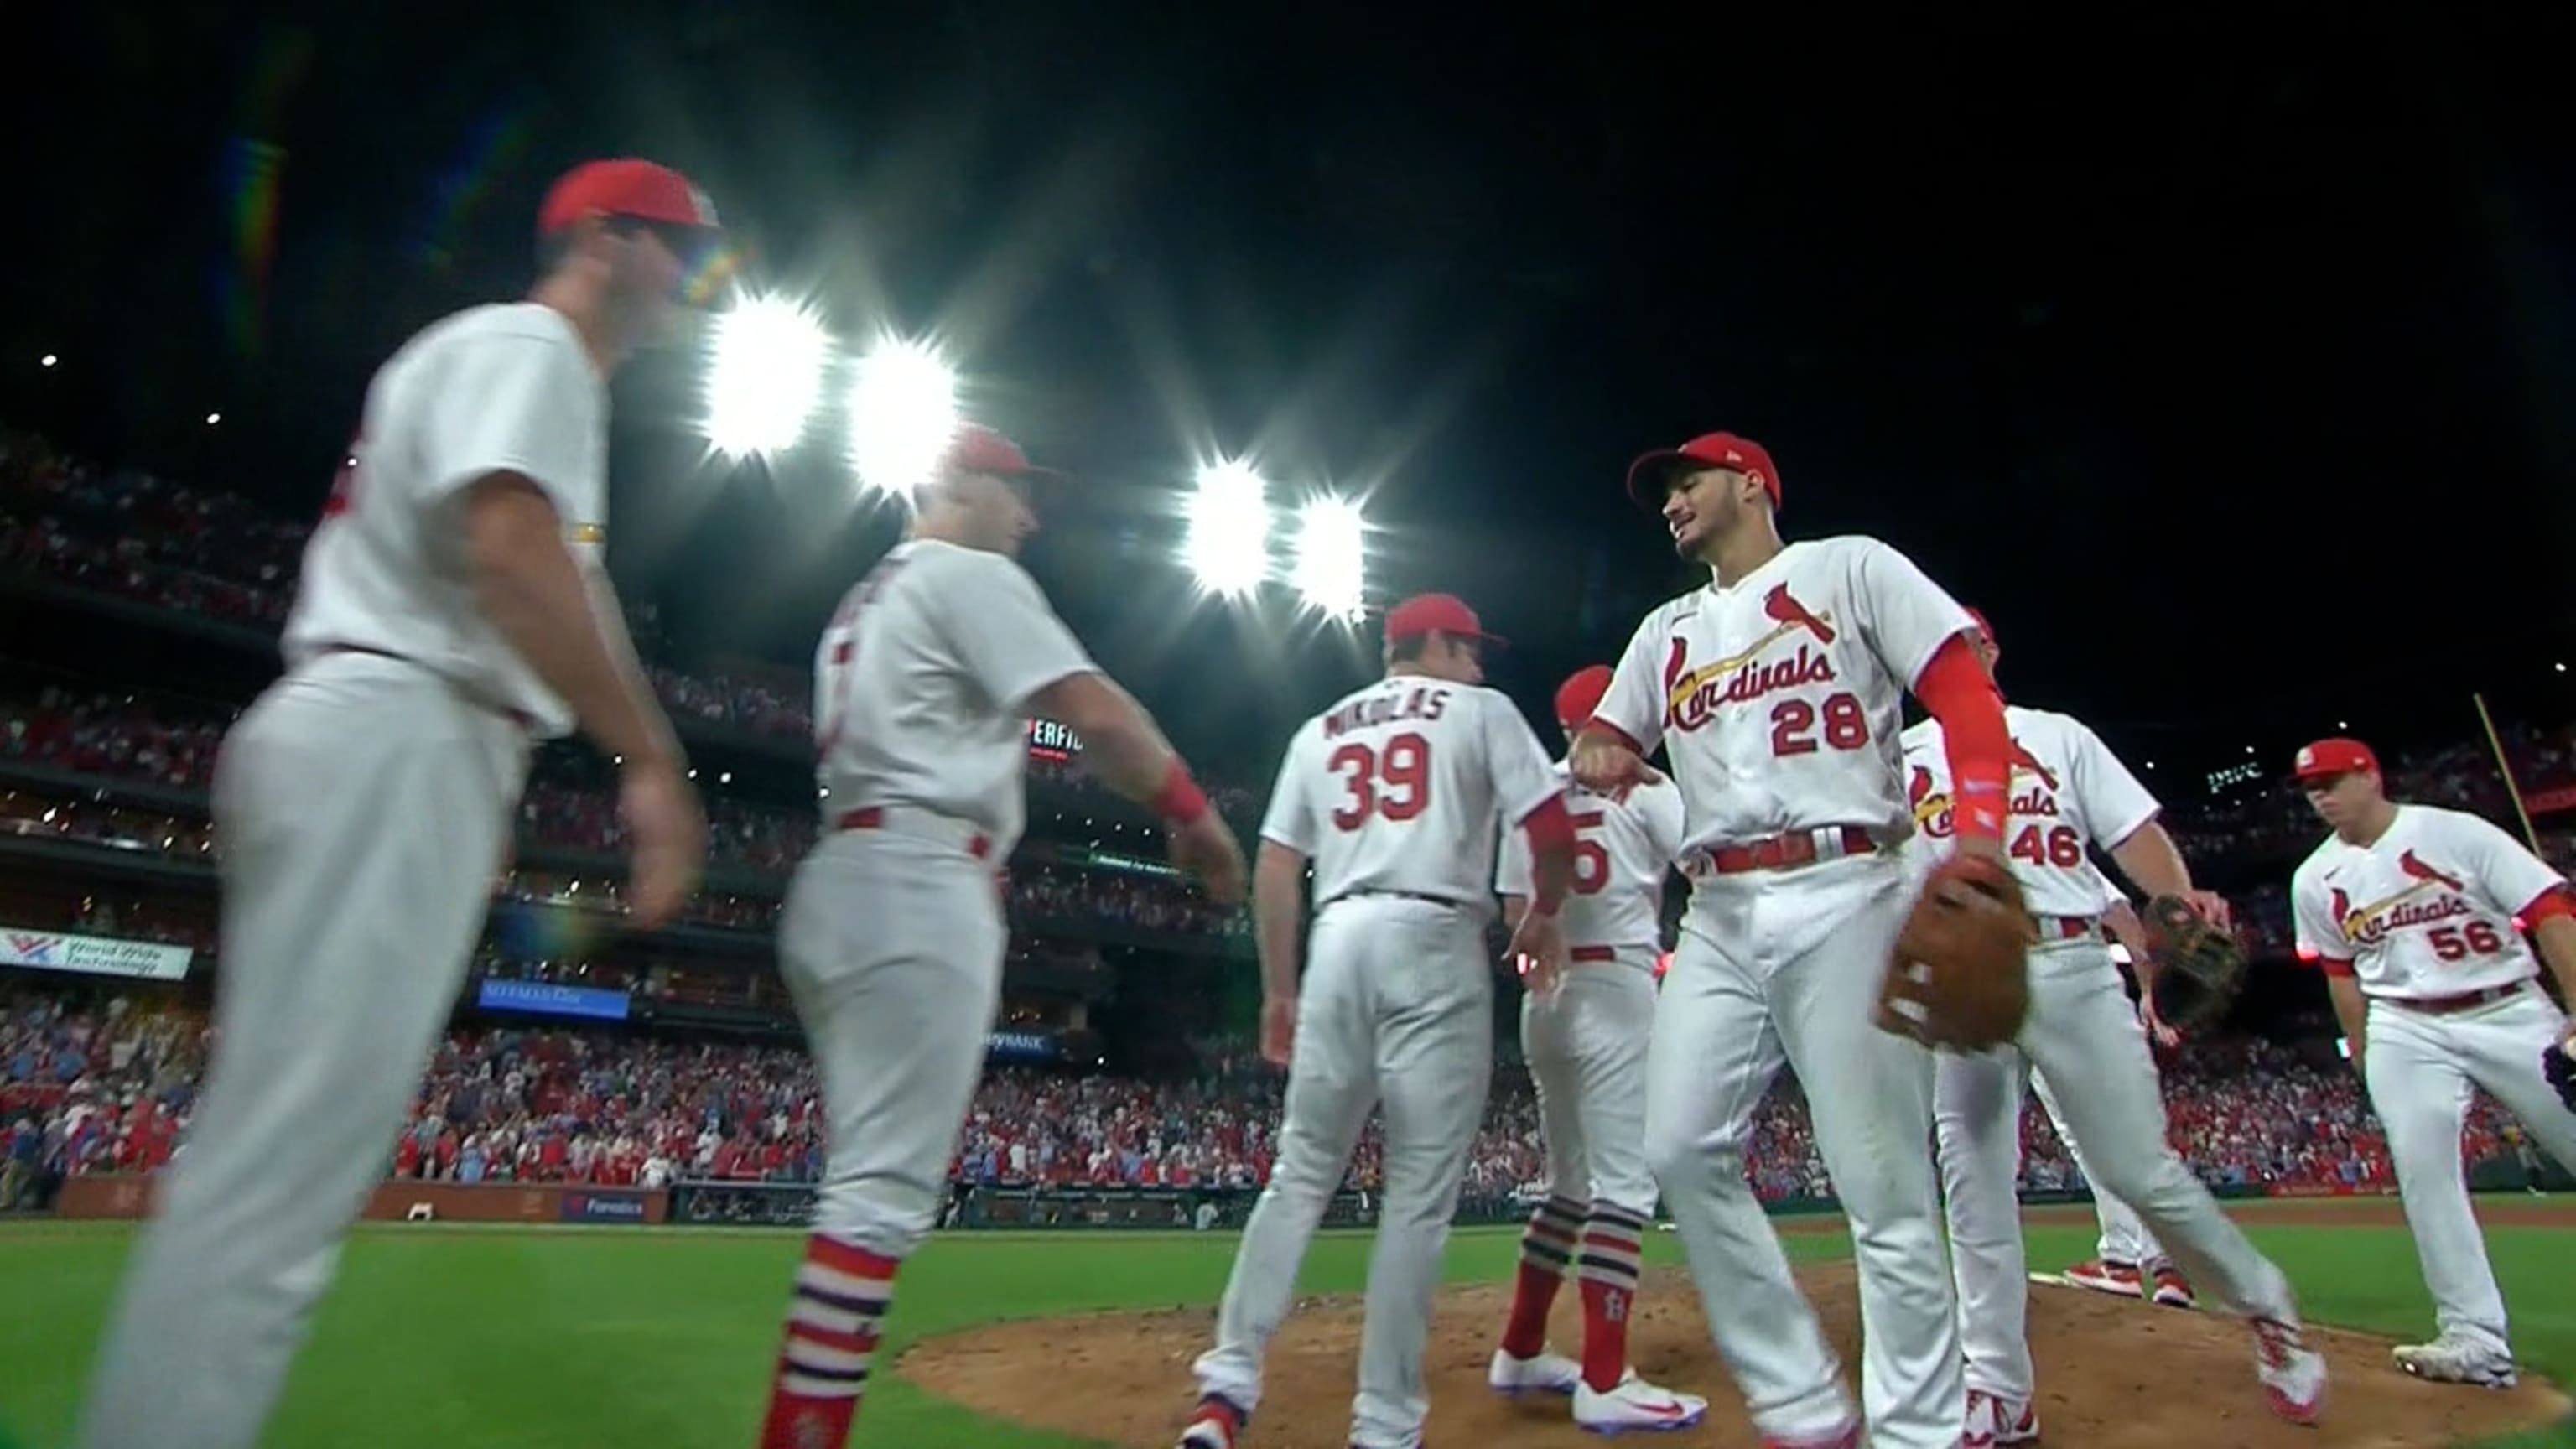 Montgomery comes up big again as Cardinals beat Brewers 3-1